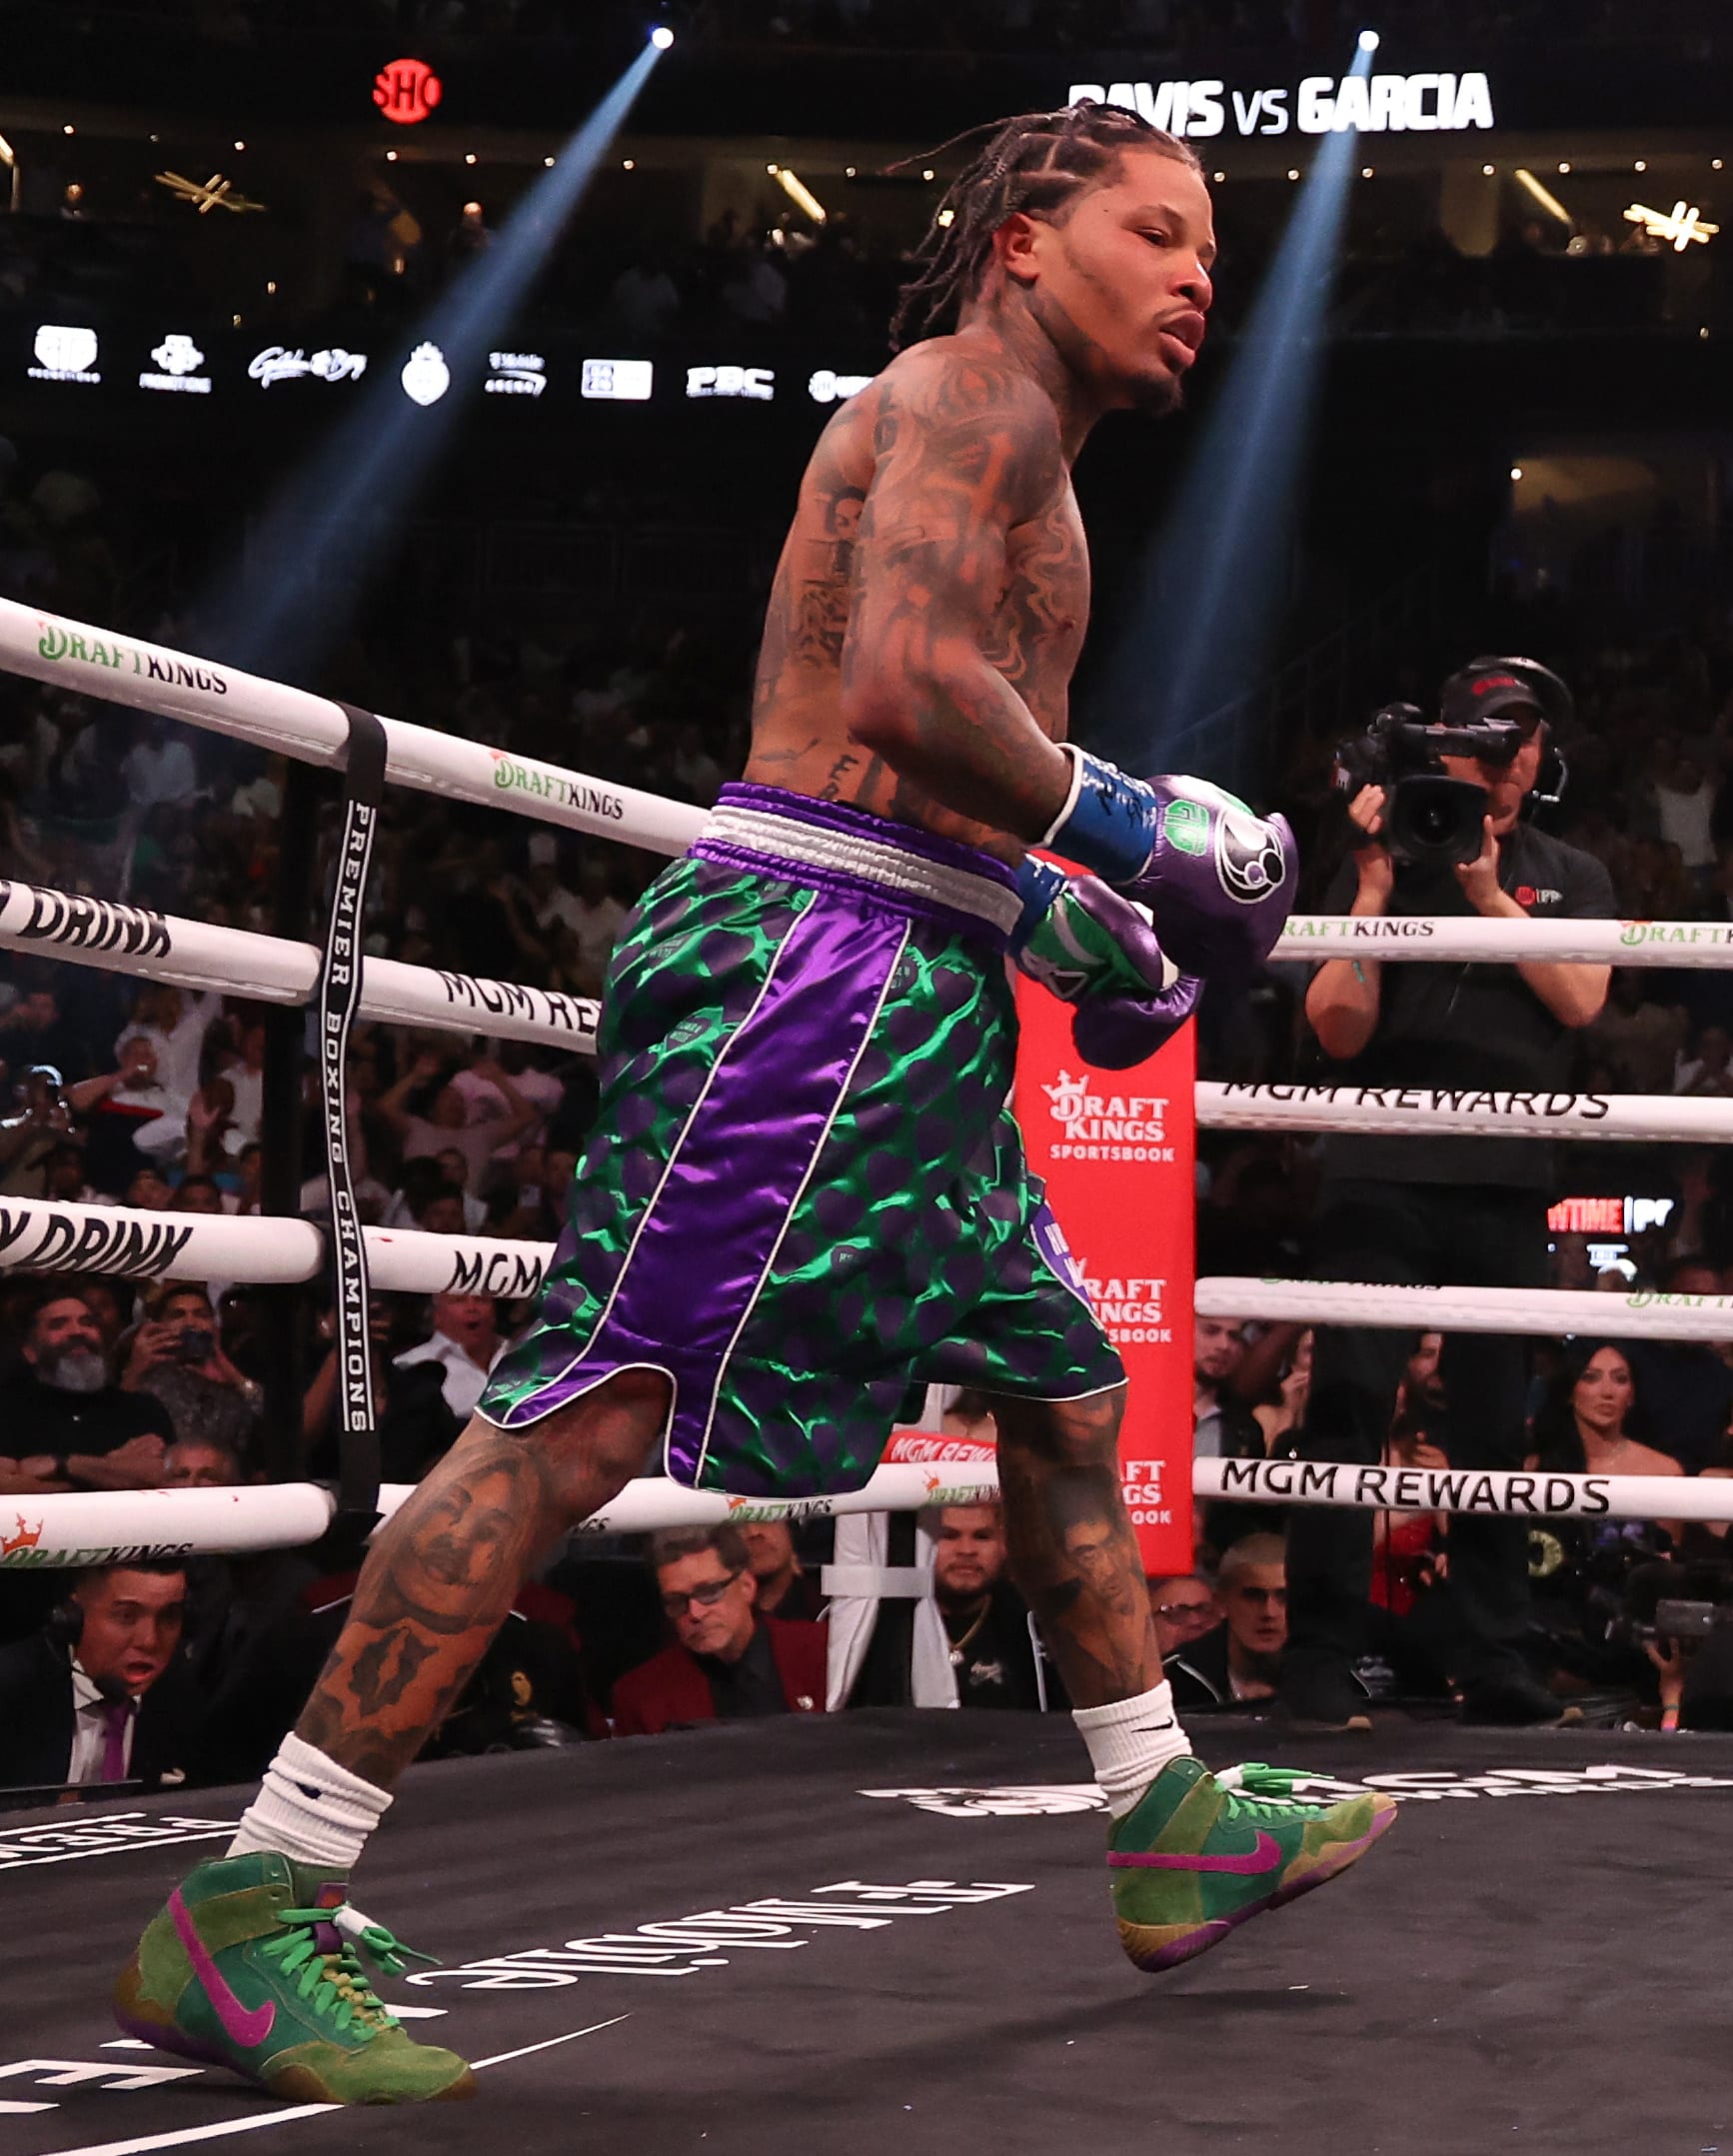 Boxing was done in style last night, as #GervontaDavis wore #HumanMade  shorts, paired with #Nike x #TheShoeSurgeon custom boots, while…